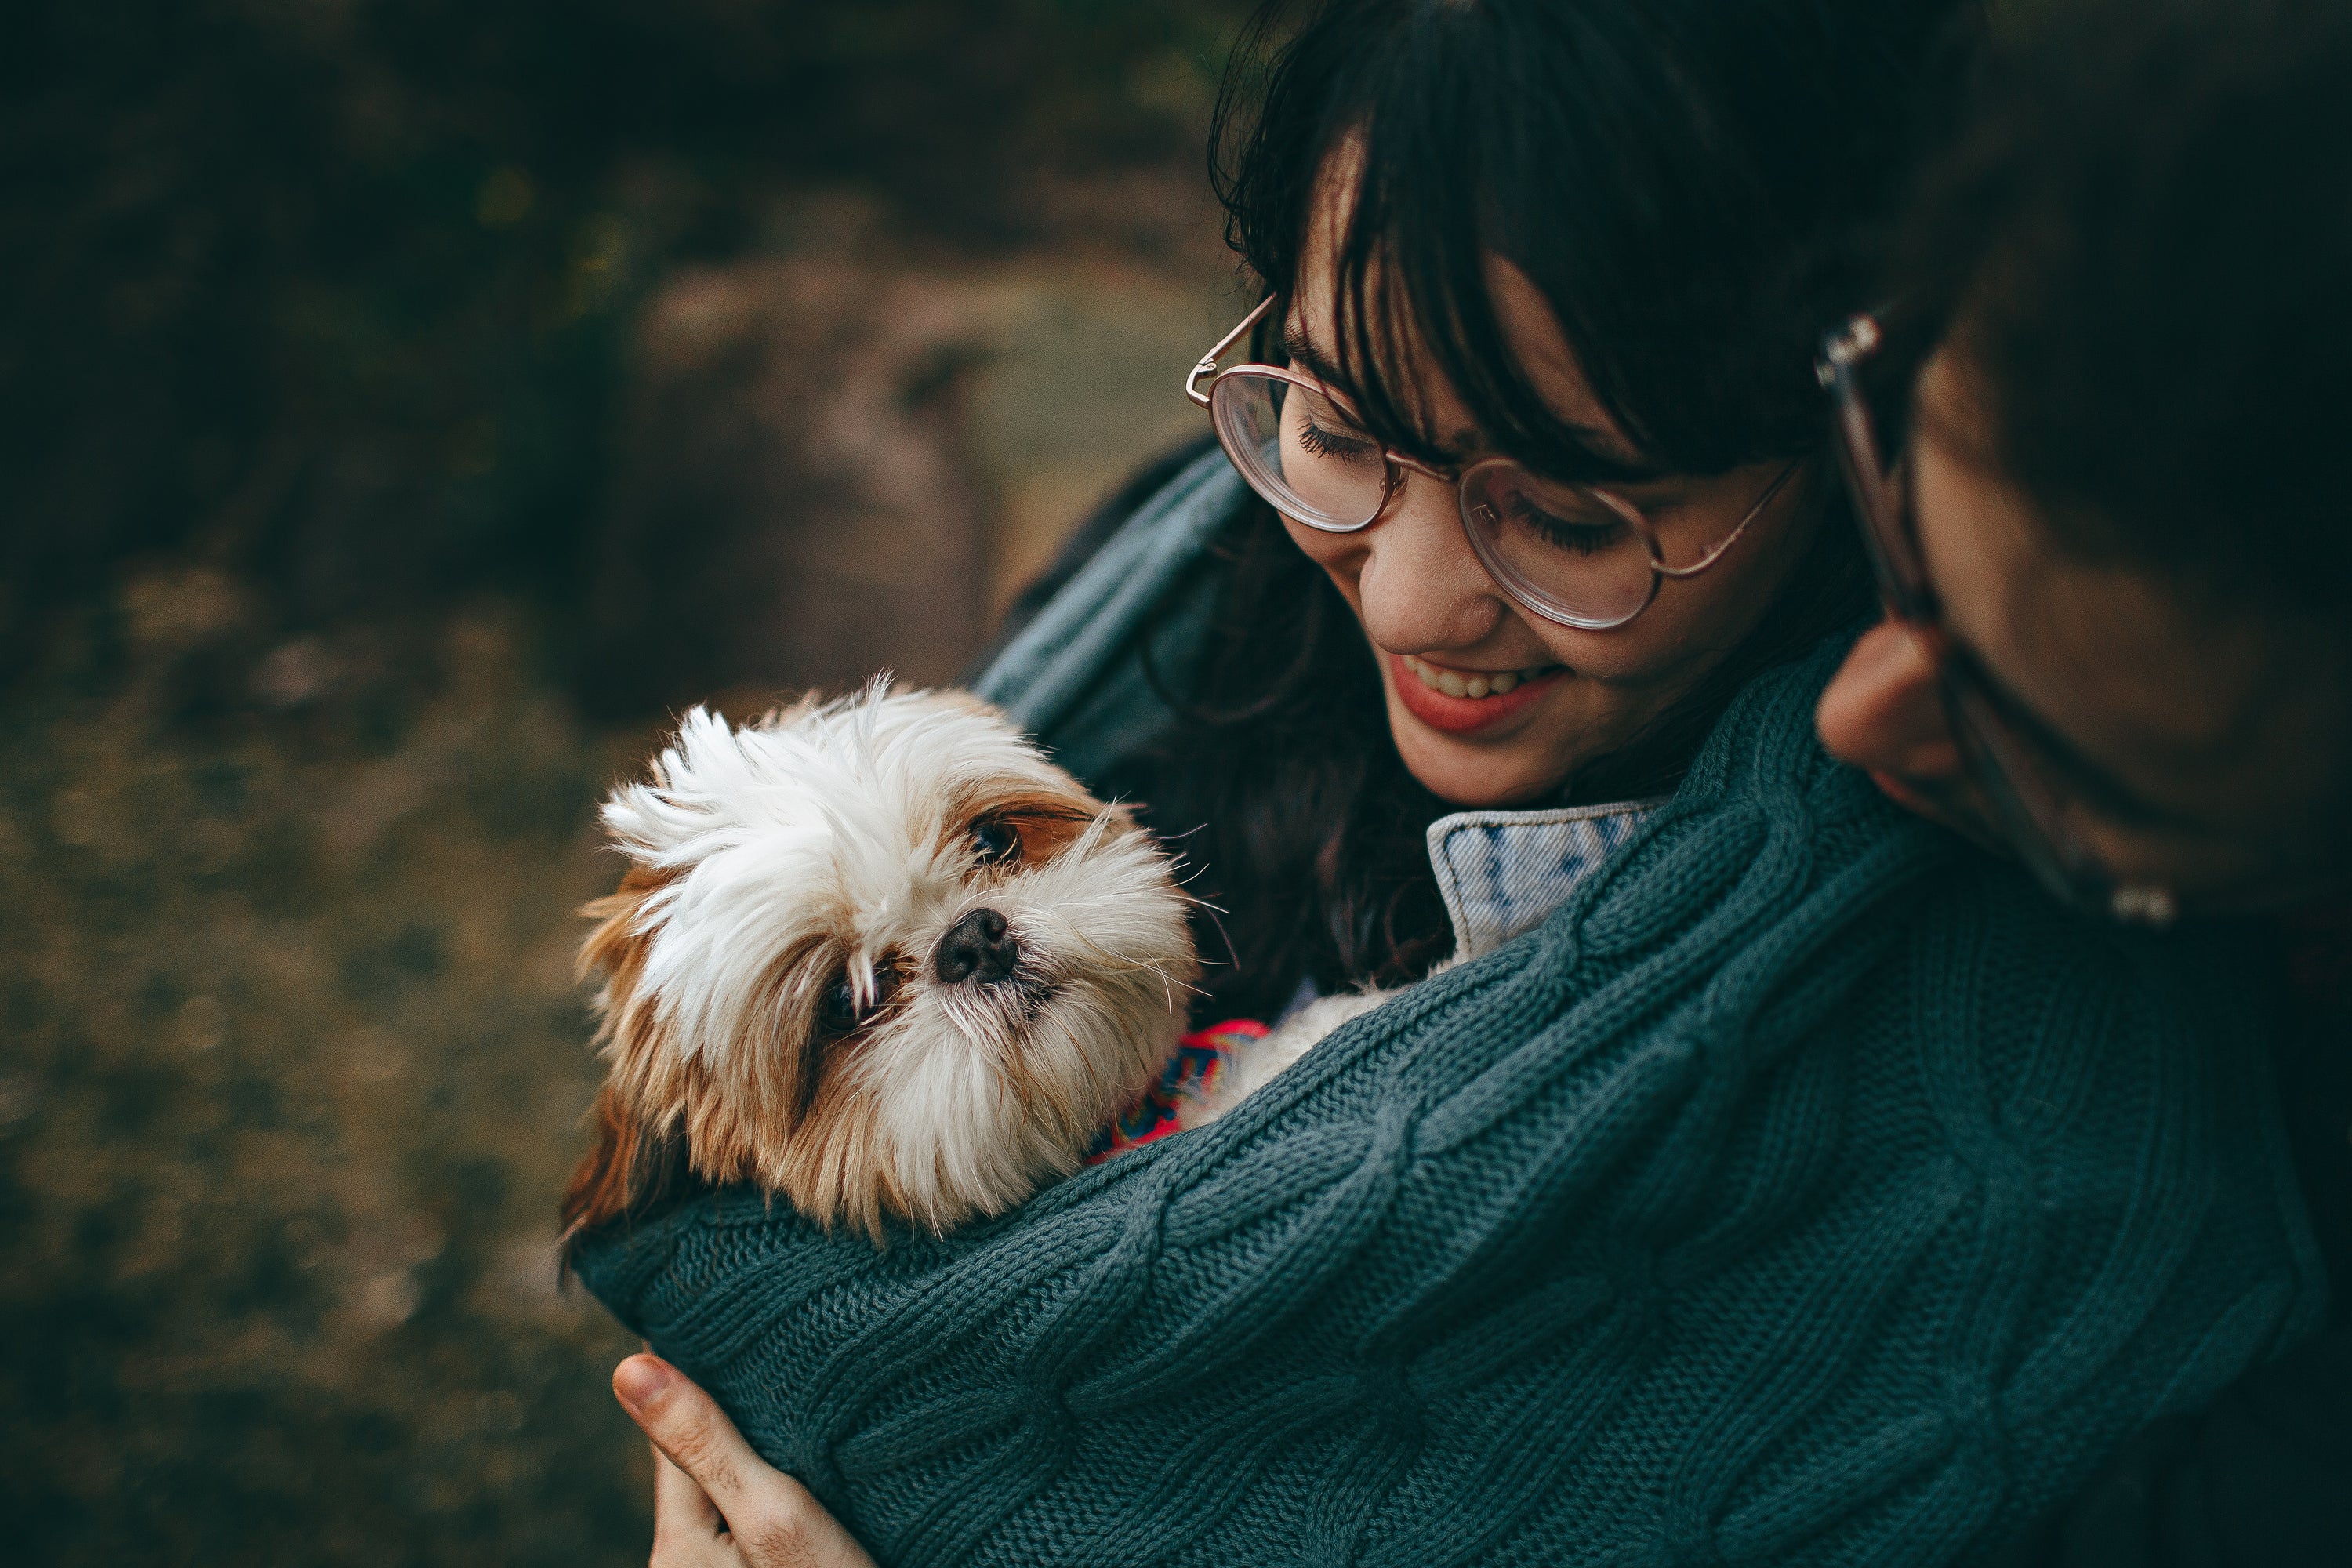 Celebrating New Beginnings: How to Welcome and Integrate Your New Pet into the Family